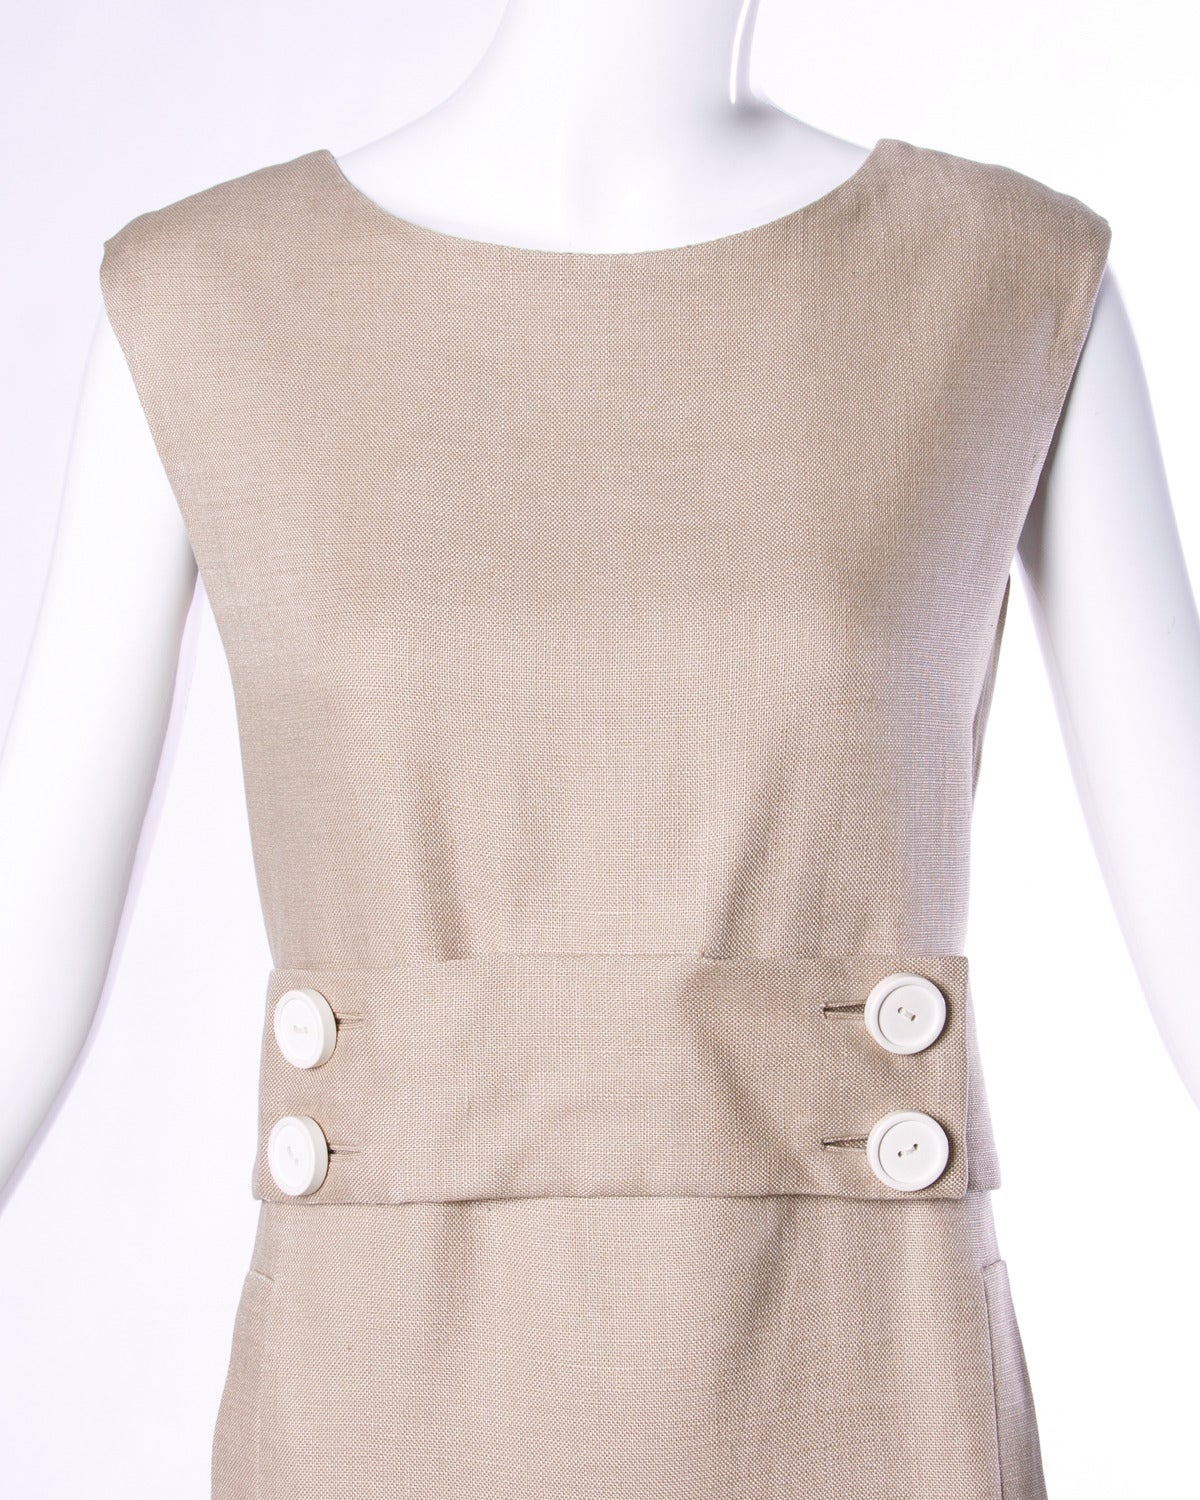 Gorgeous vintage 1960's sheath dress by Norman Norell for I. Magnin. Heavy weight linen fabric that is fully lined in silk. Hand stitched couture detailing/ custom made. Stunning construction!

Details:

Side Pockets
Matching Belt
Back Zip and